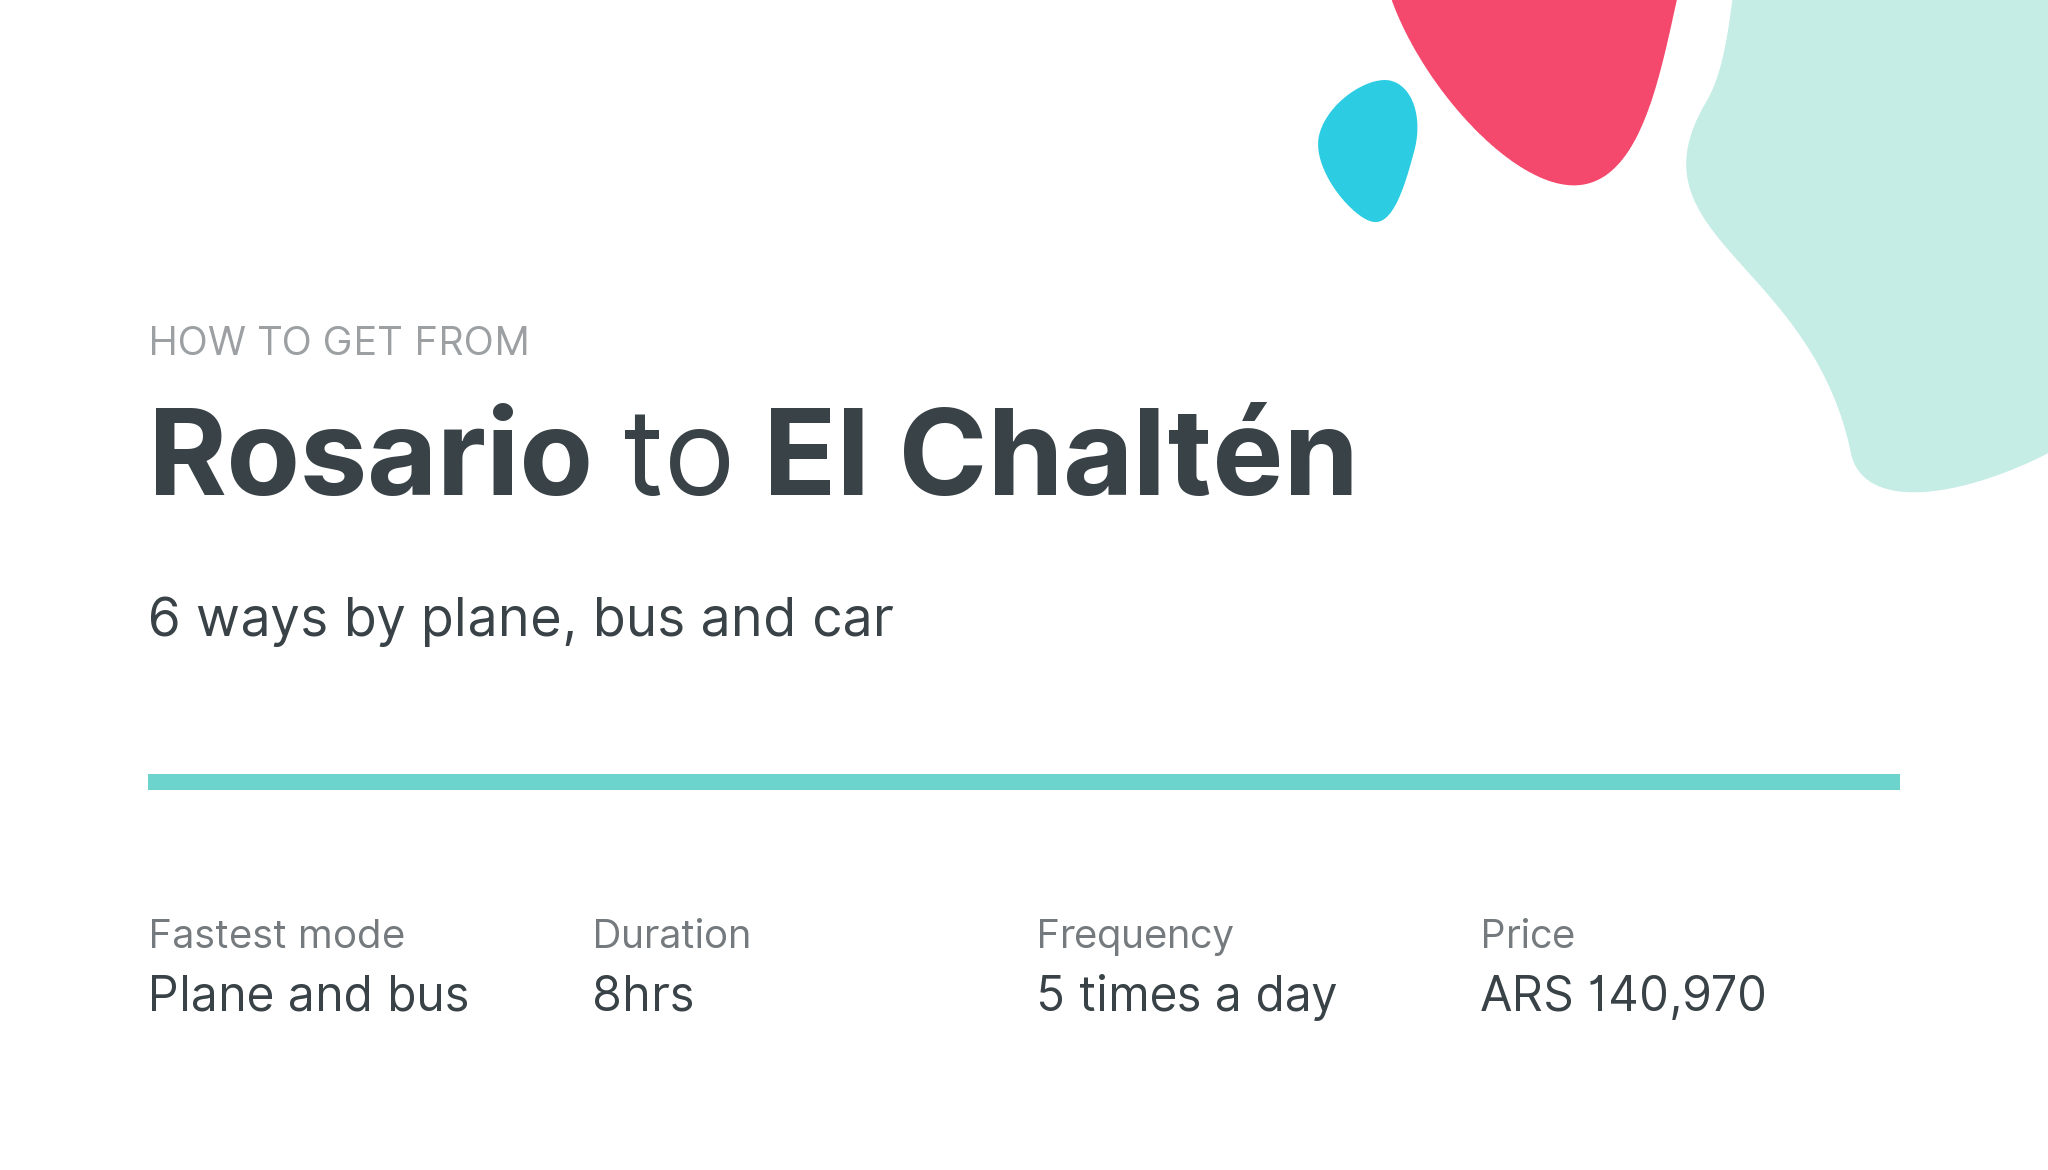 How do I get from Rosario to El Chaltén